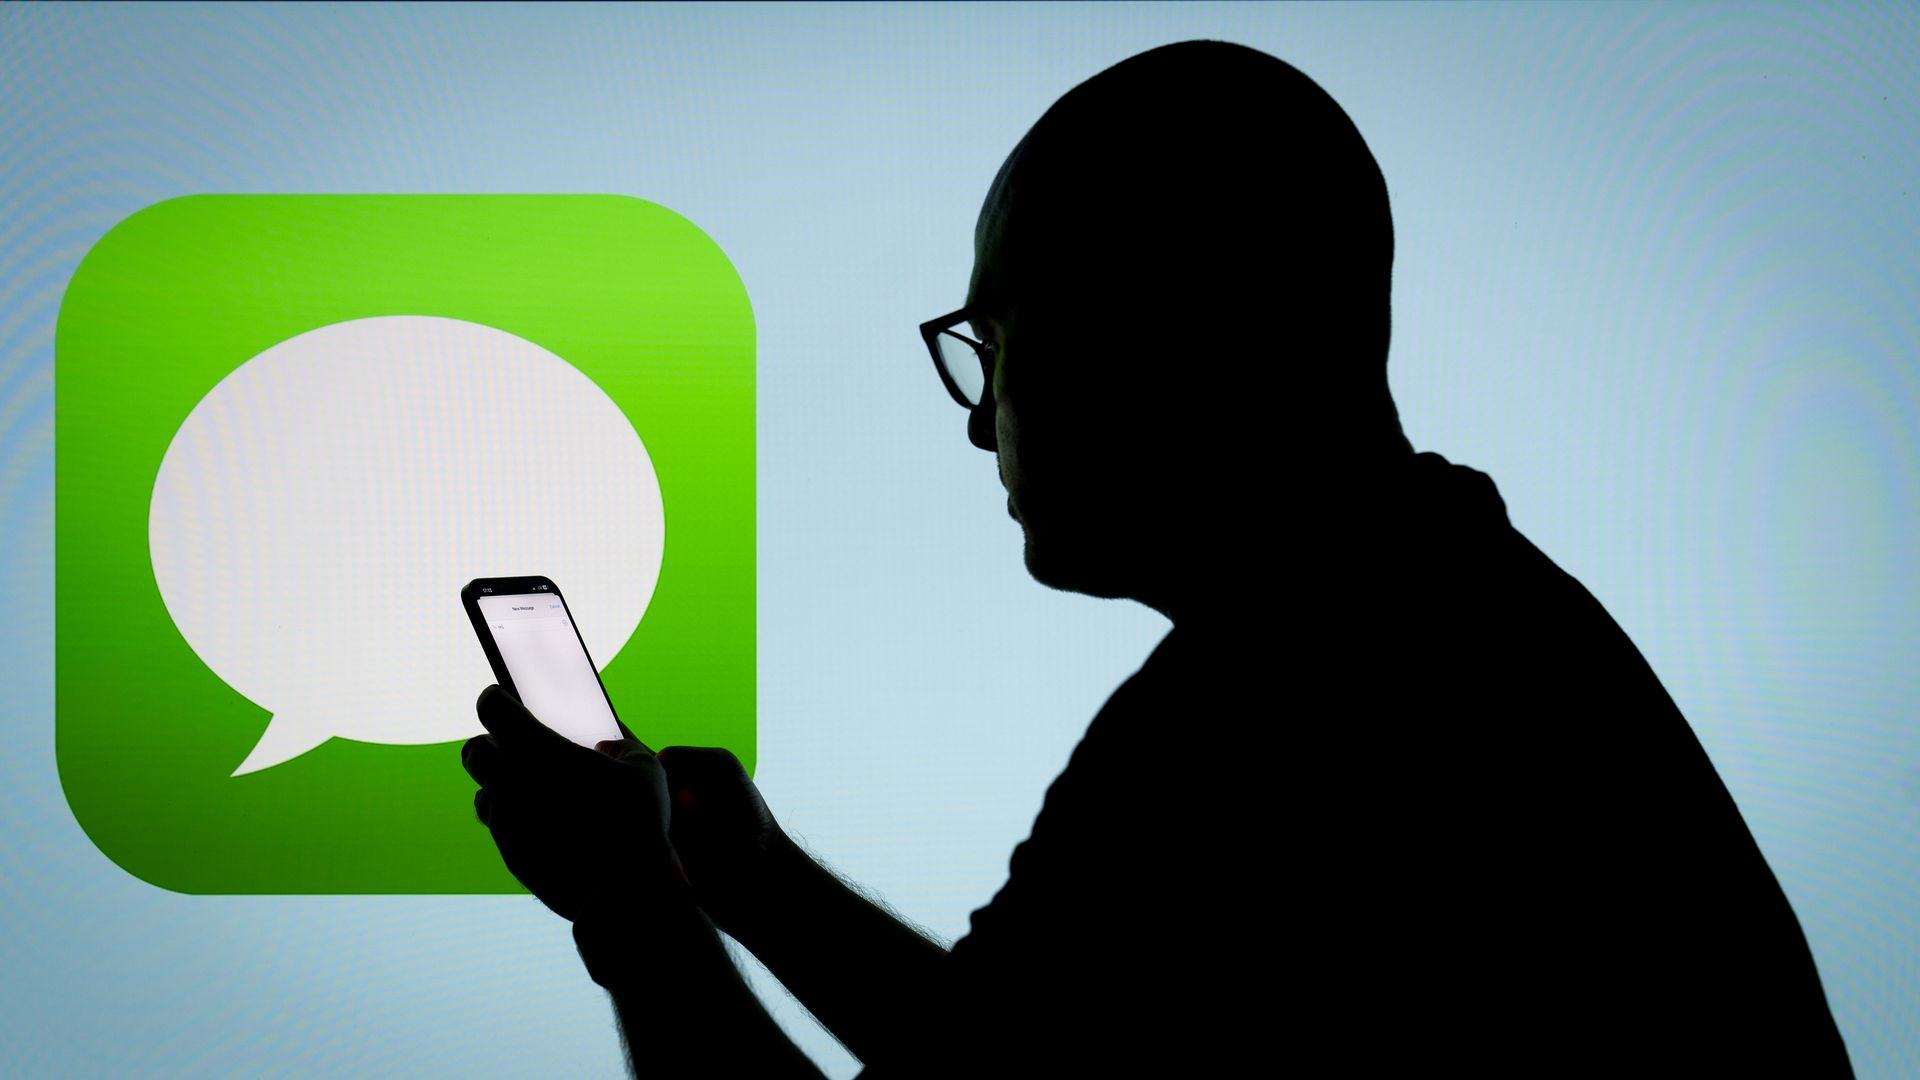 The Apple iMessage app and logo are seen in this photo illustration